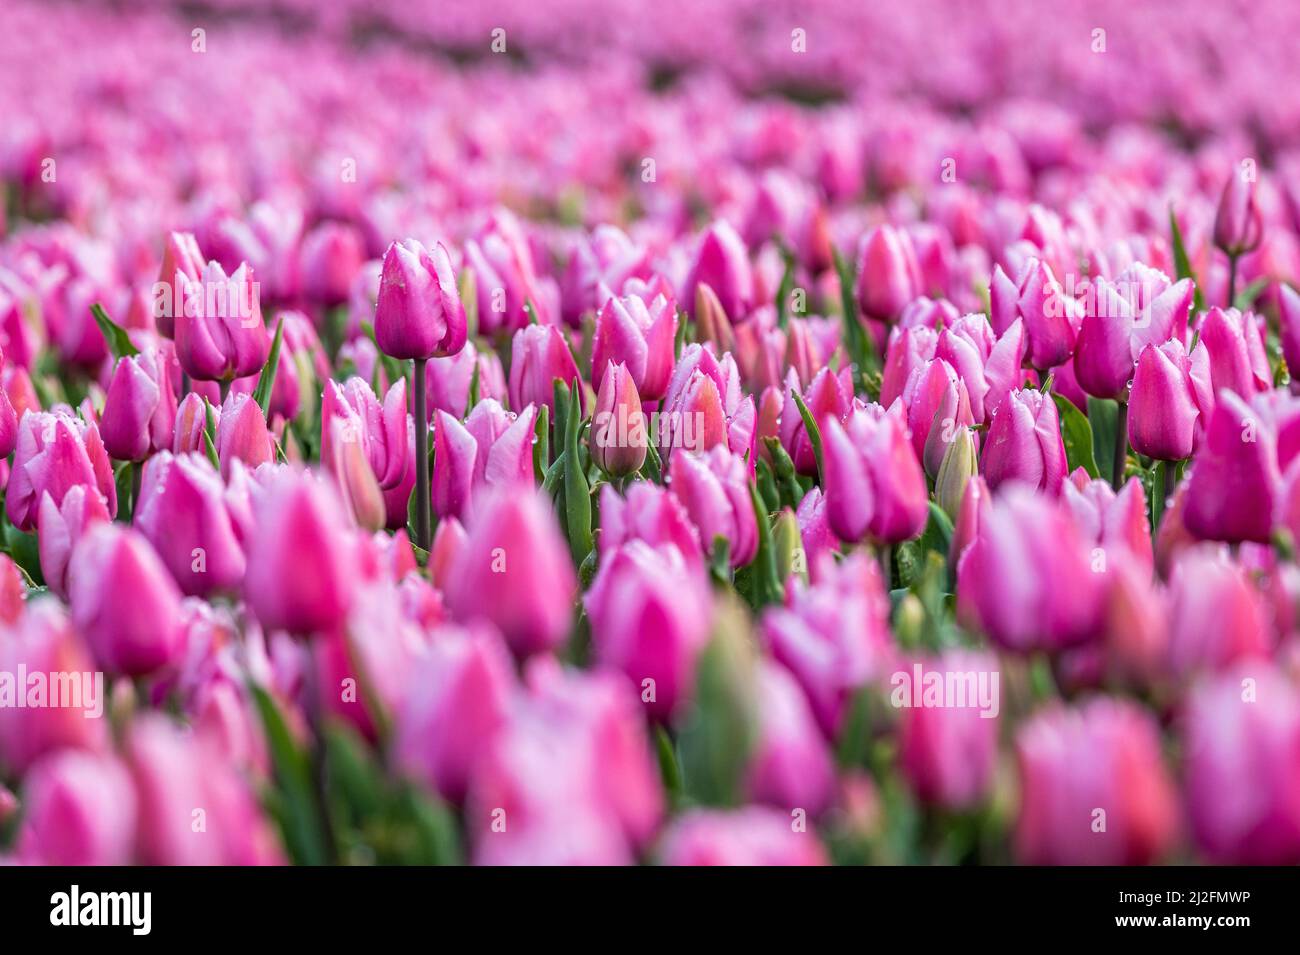 2022-03-31 08:09:32 31-03-2022, Zuid-Beijerland - Tulip fields in bloom on a field in Zuid-Beijerland. The tulips bloom early this year due to the beautiful sunny weather. Photo: ANP / Hollandse Hoogte / Jeffrey Groeneweg netherlands out - belgium out Stock Photo